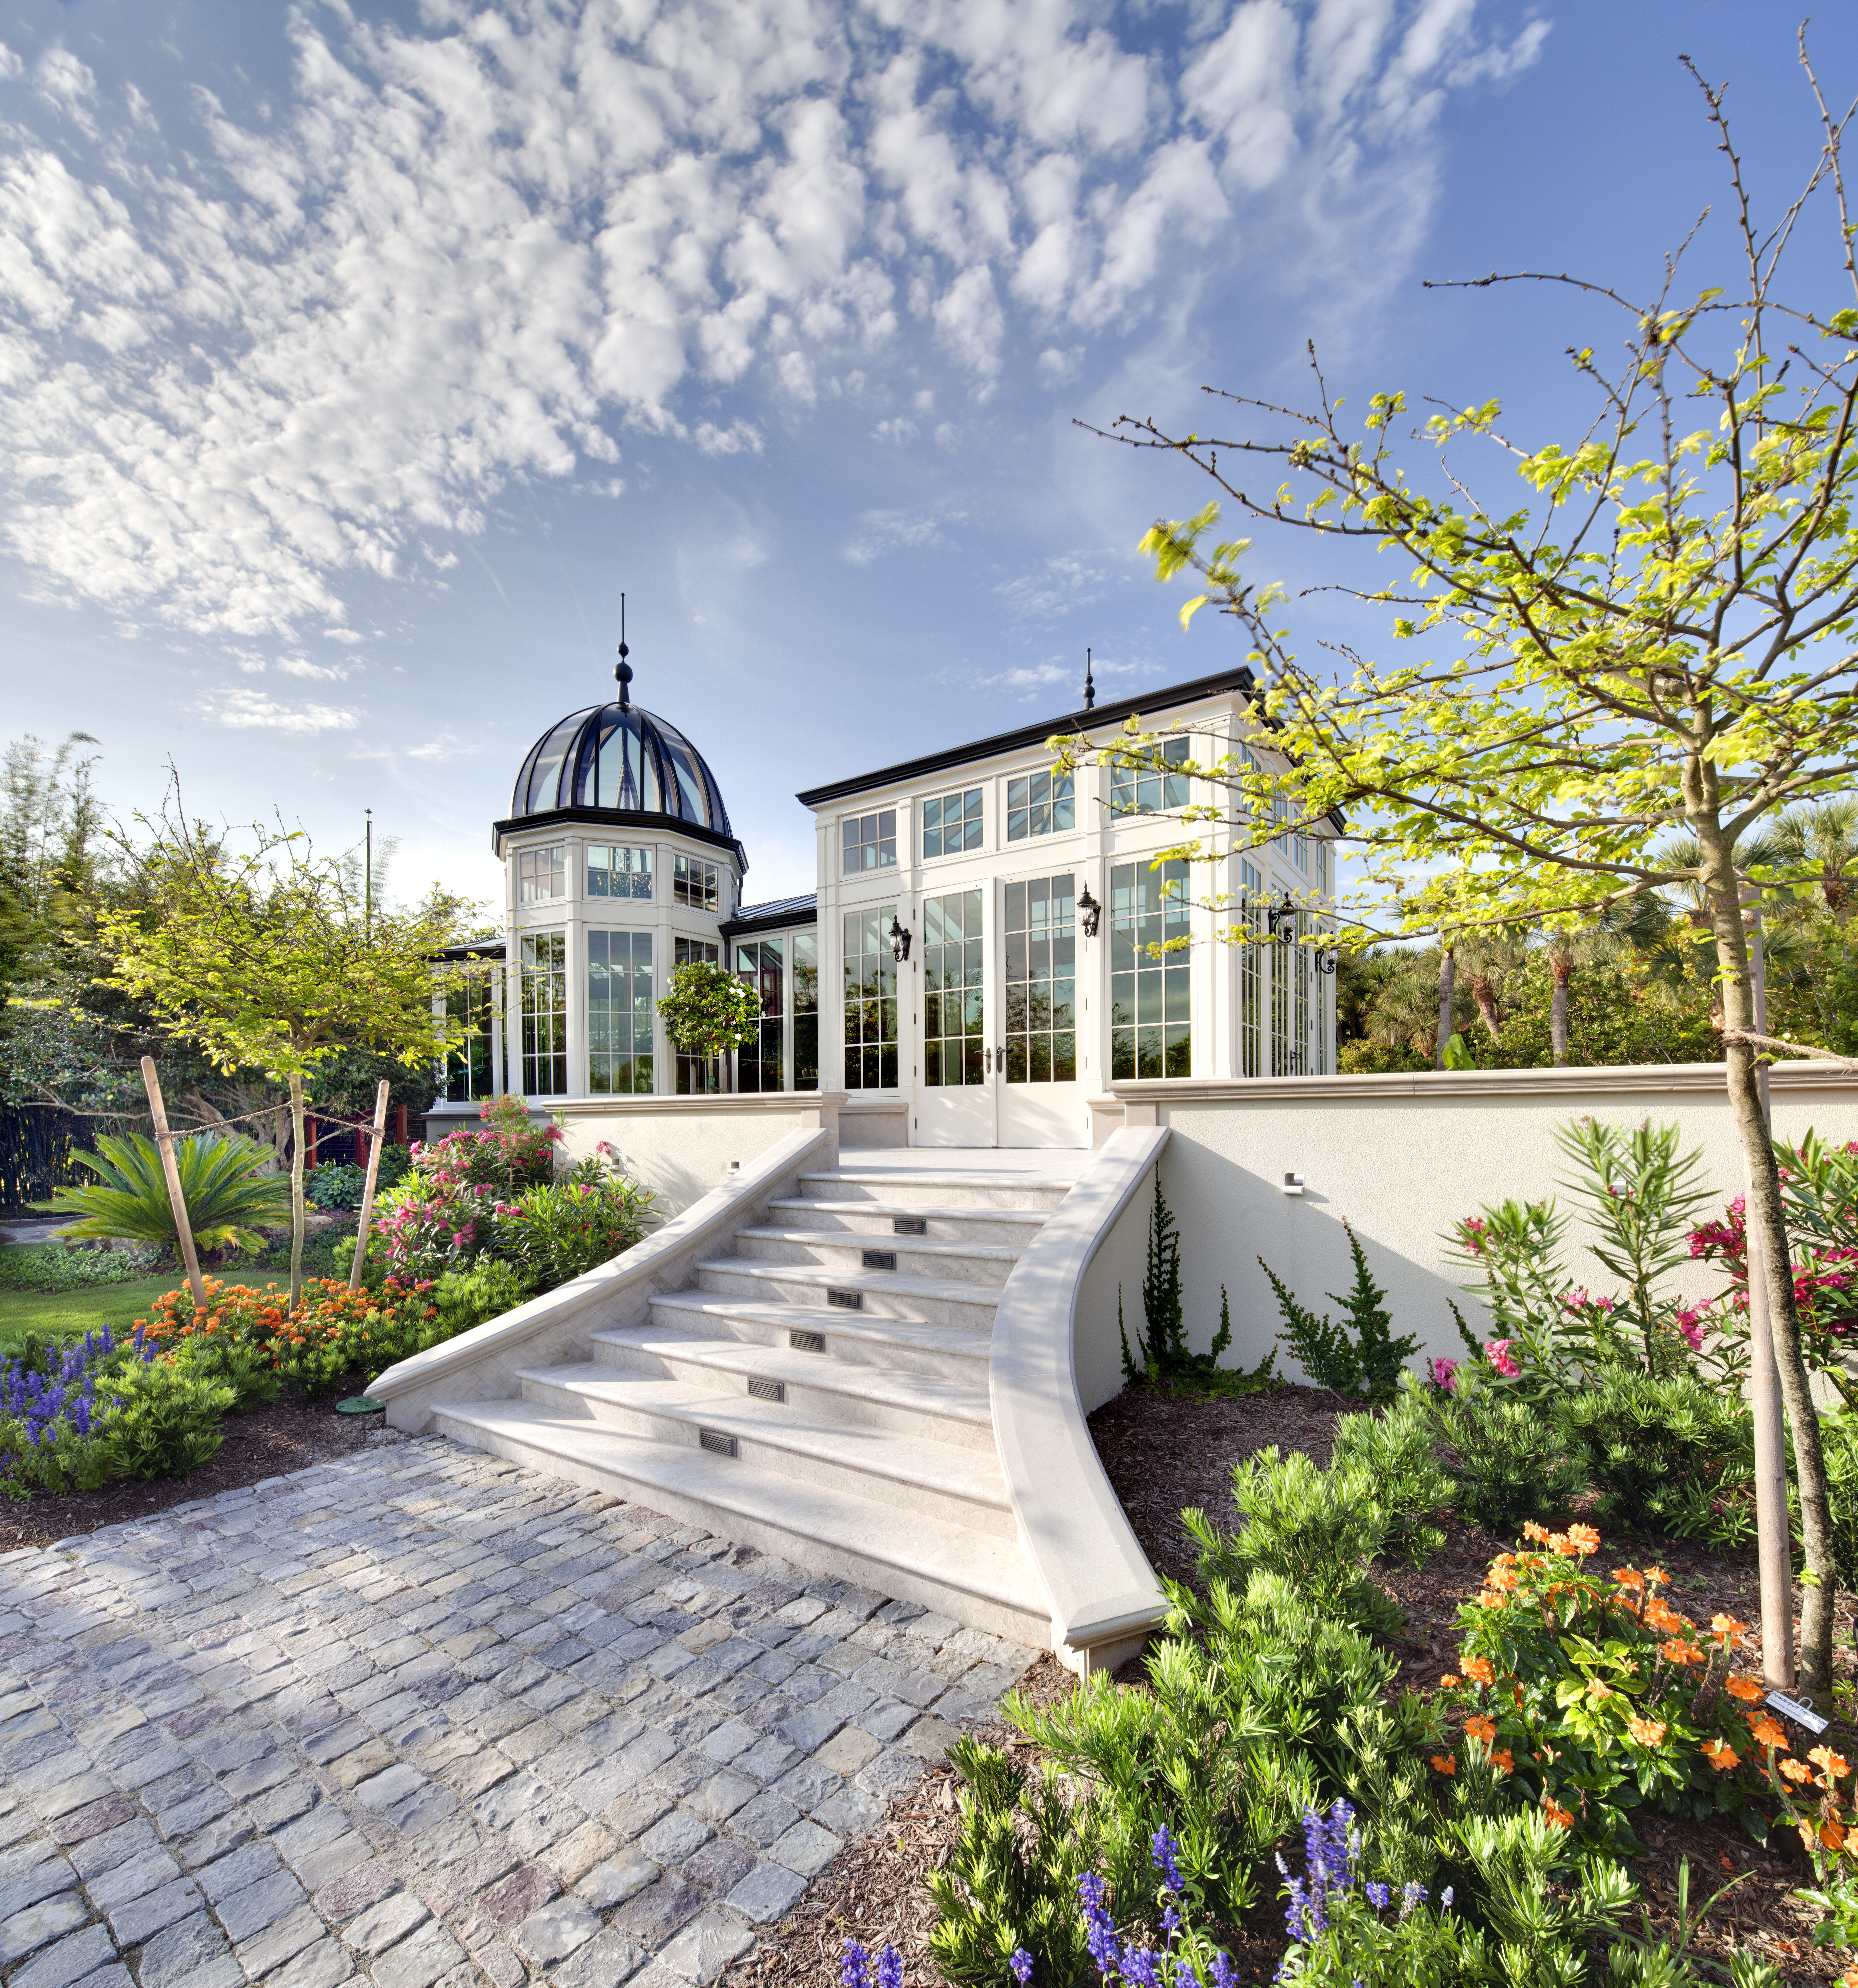 Award-Winning Conservatory Greenhouse_conservatories and greenhouses